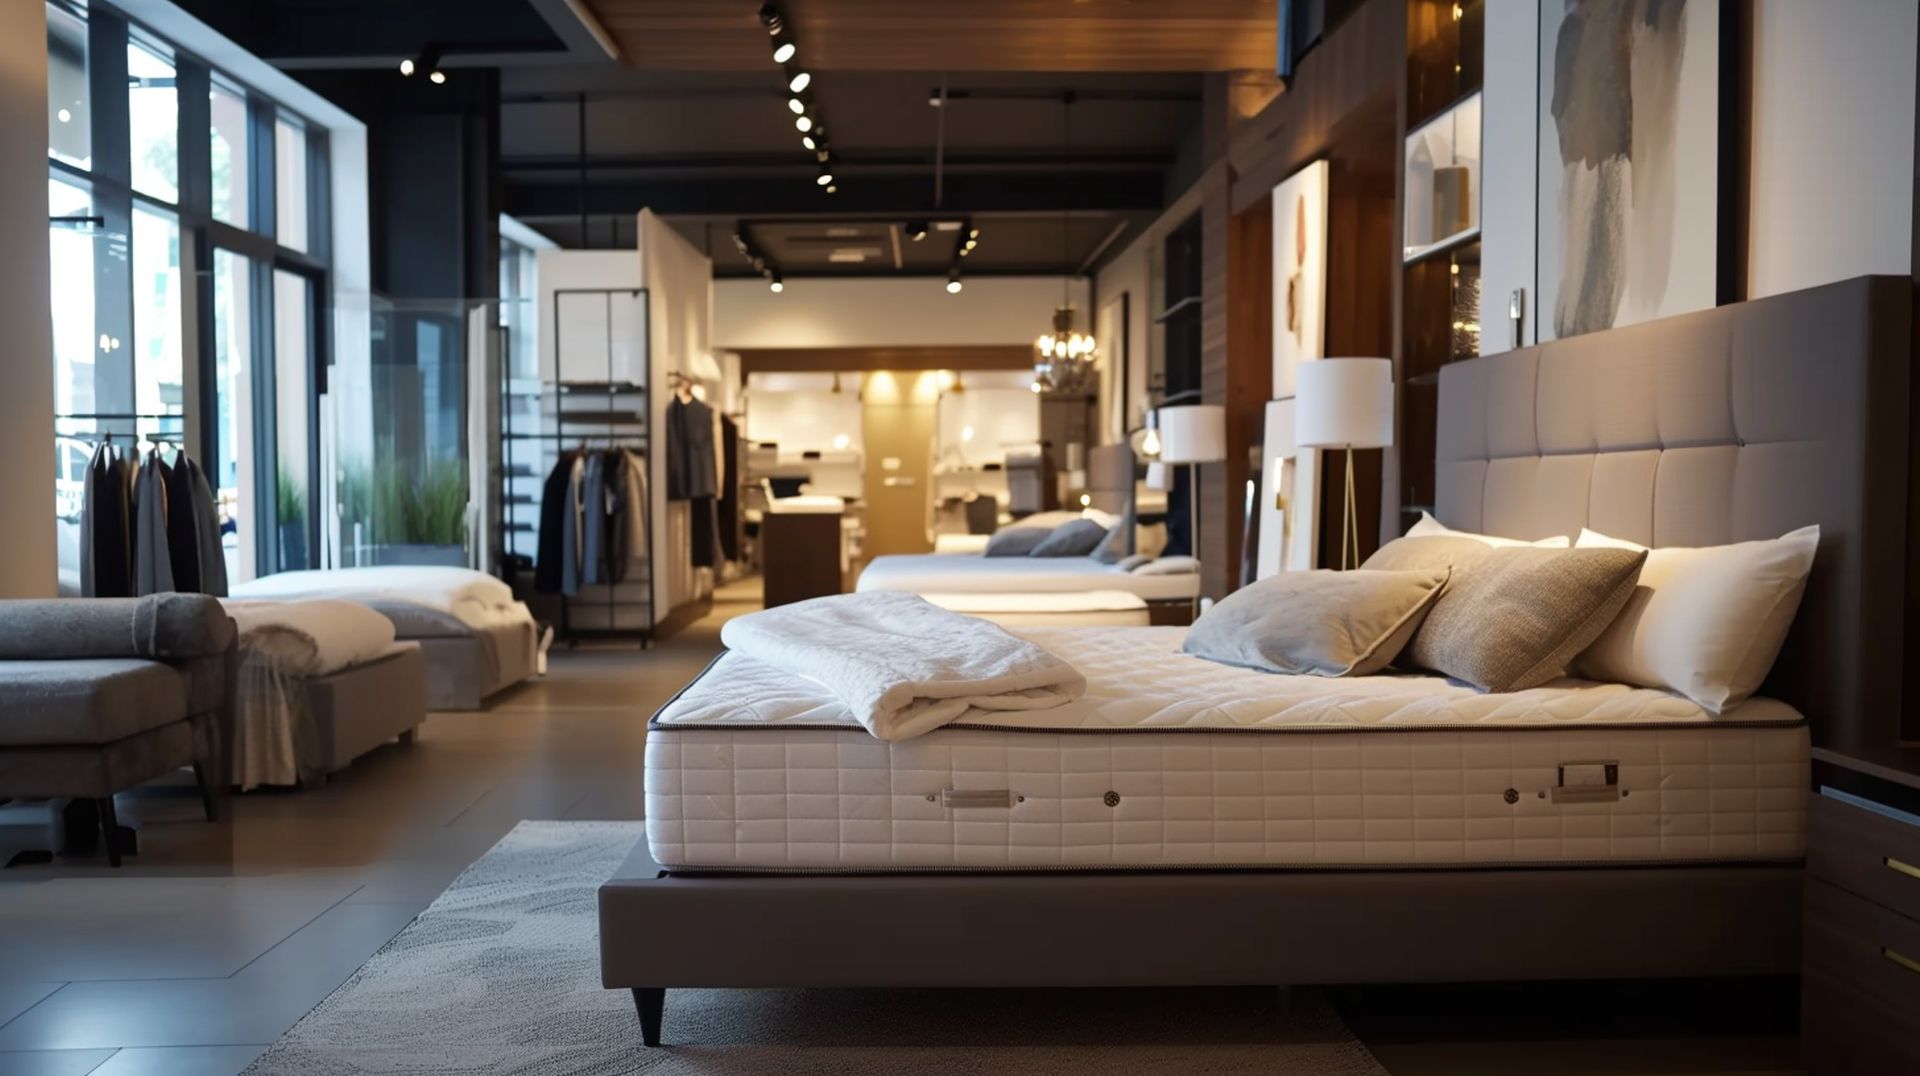 If you're looking for a new bed, mattress stores in Malden offer the best customer and delivery service, financing, and warranties in Massachusetts